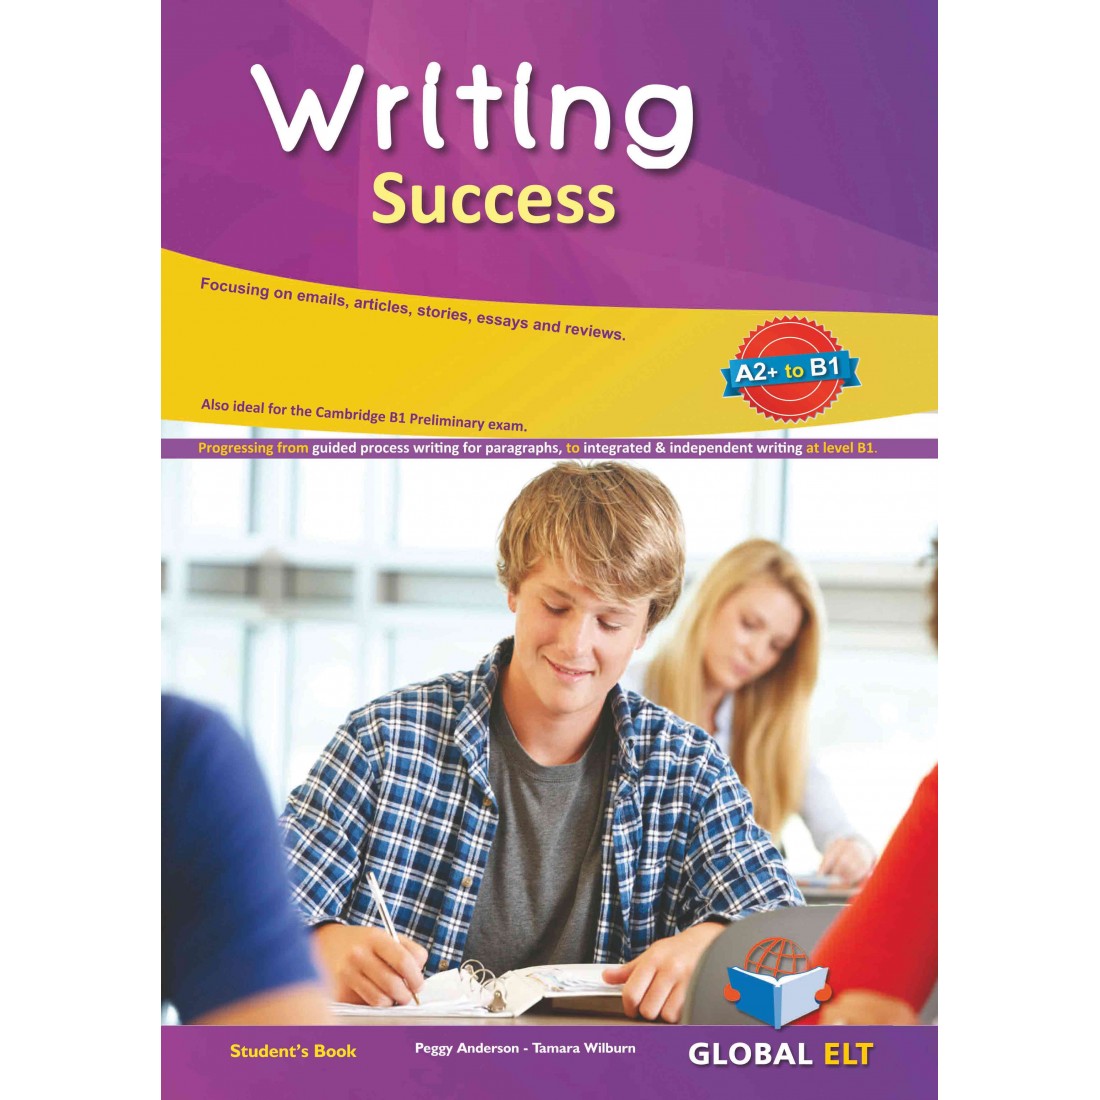 Successful writing. Student's book a2+. CPE Practice Tests 4. Think b1 student's book 2. B1 Business English student book.